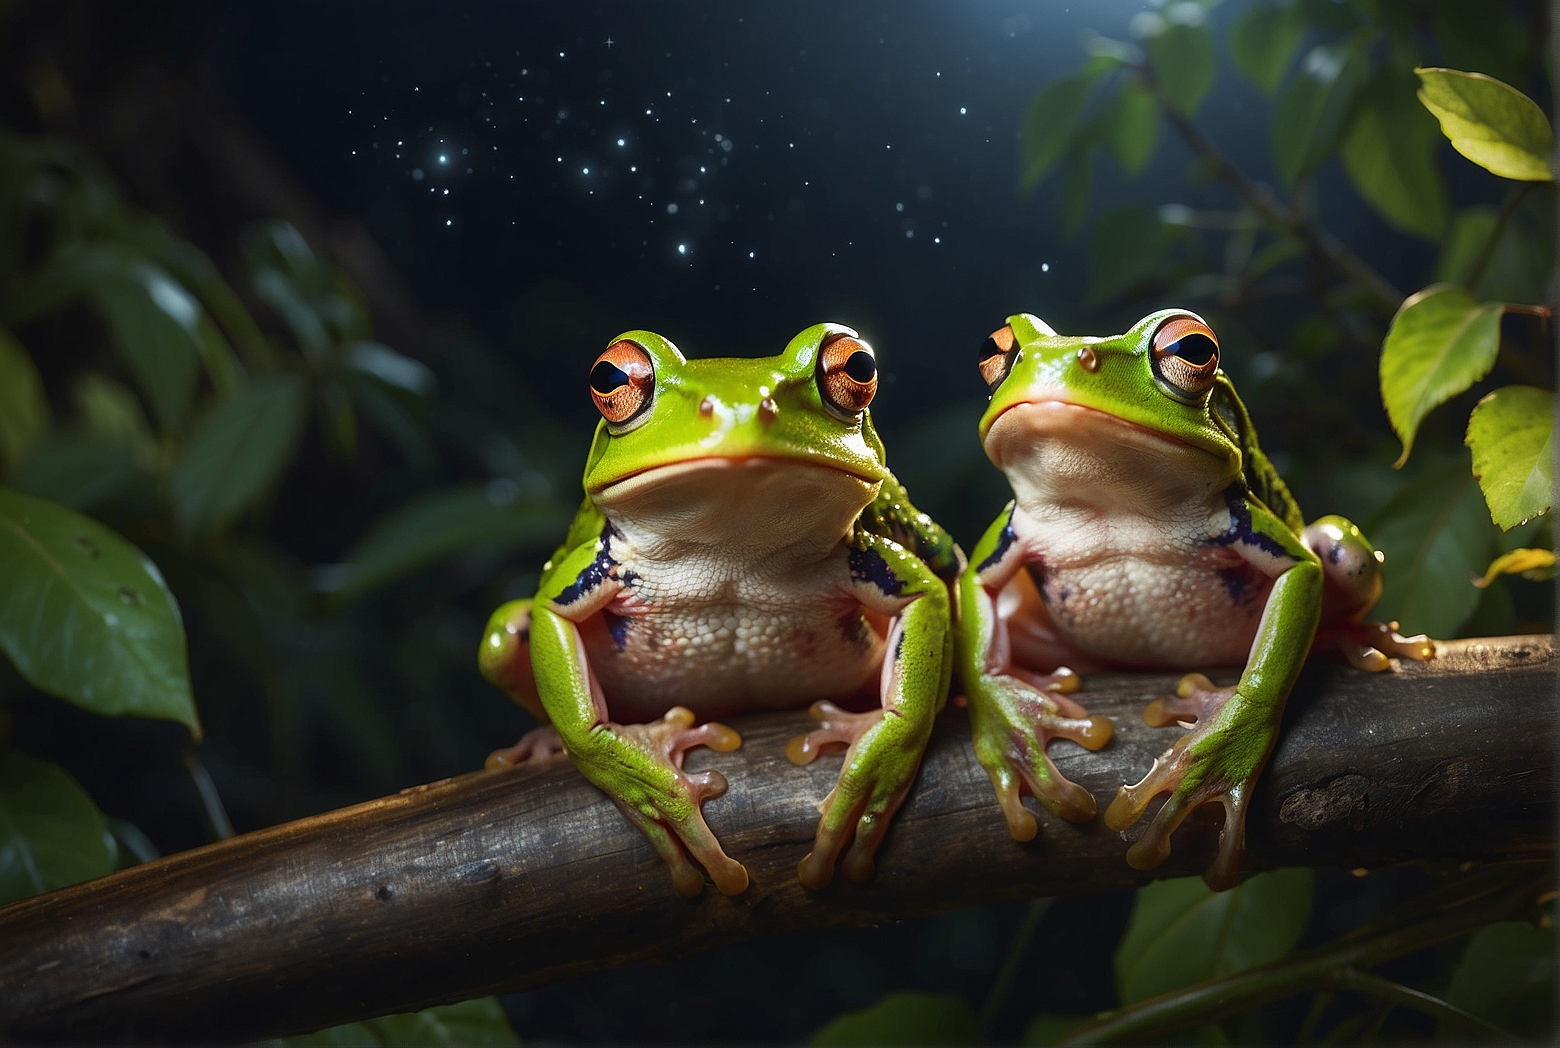 Do Tree Frogs Sing at Night?